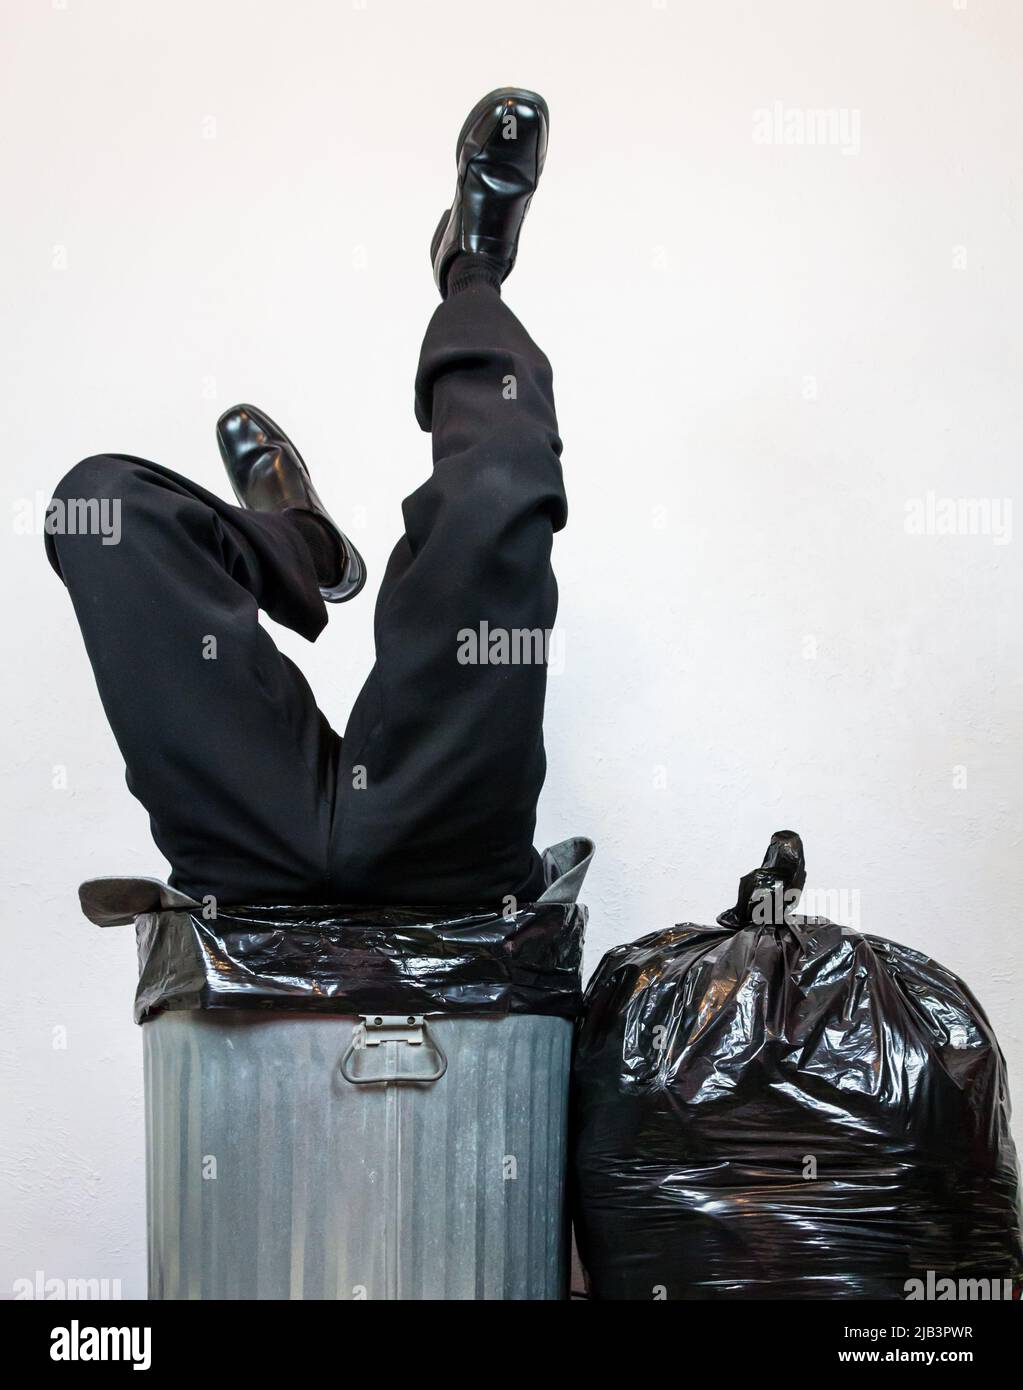 Businessman in Suit Upside Down in Metal Trash Can. Concept of Over a Barrel. Stock Photo